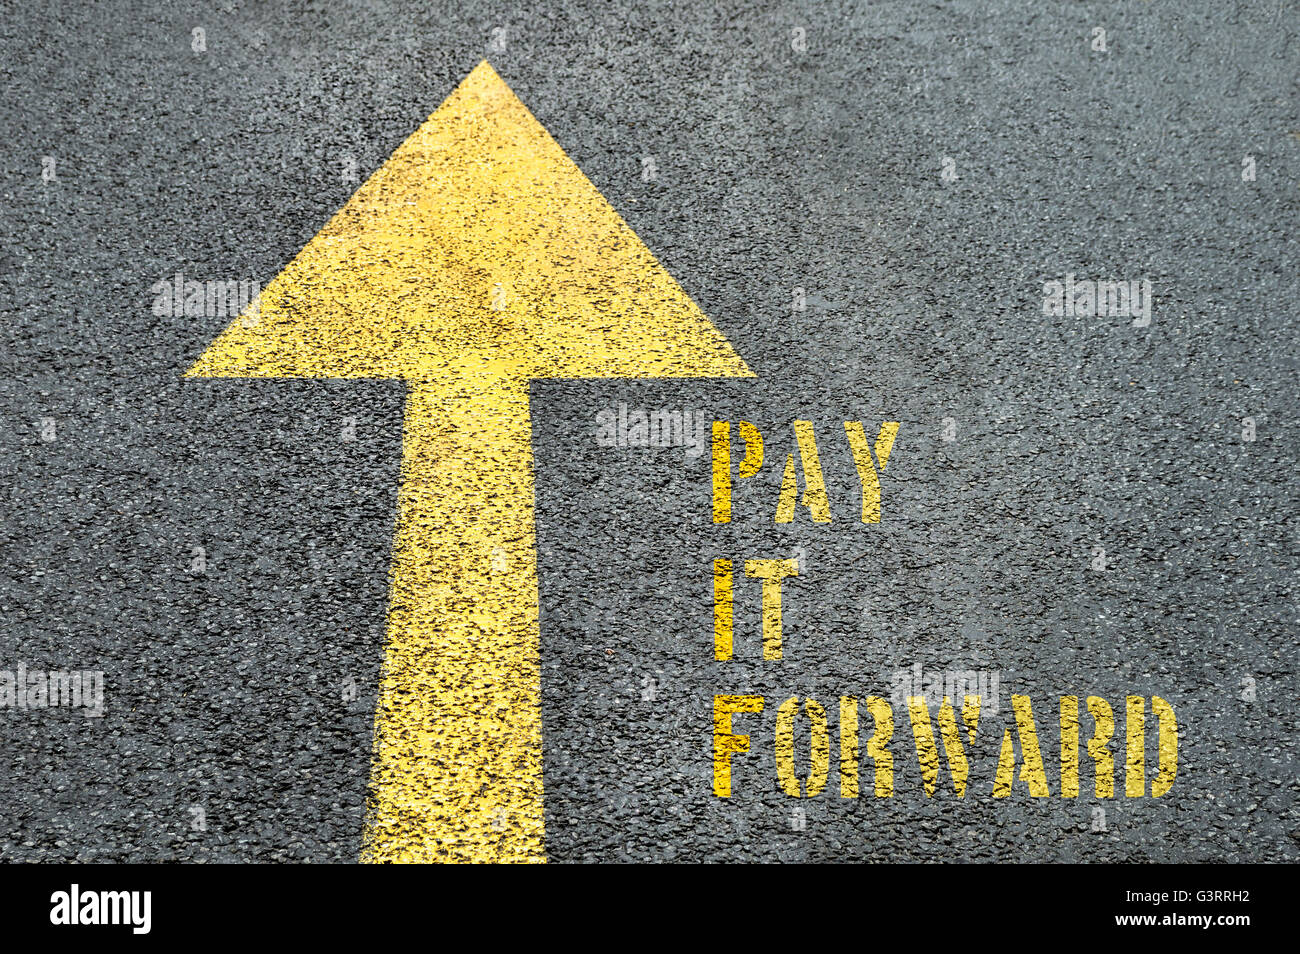 Yellow forward road sign with Pay It Forward word on the asphalt road. Business concept. Stock Photo